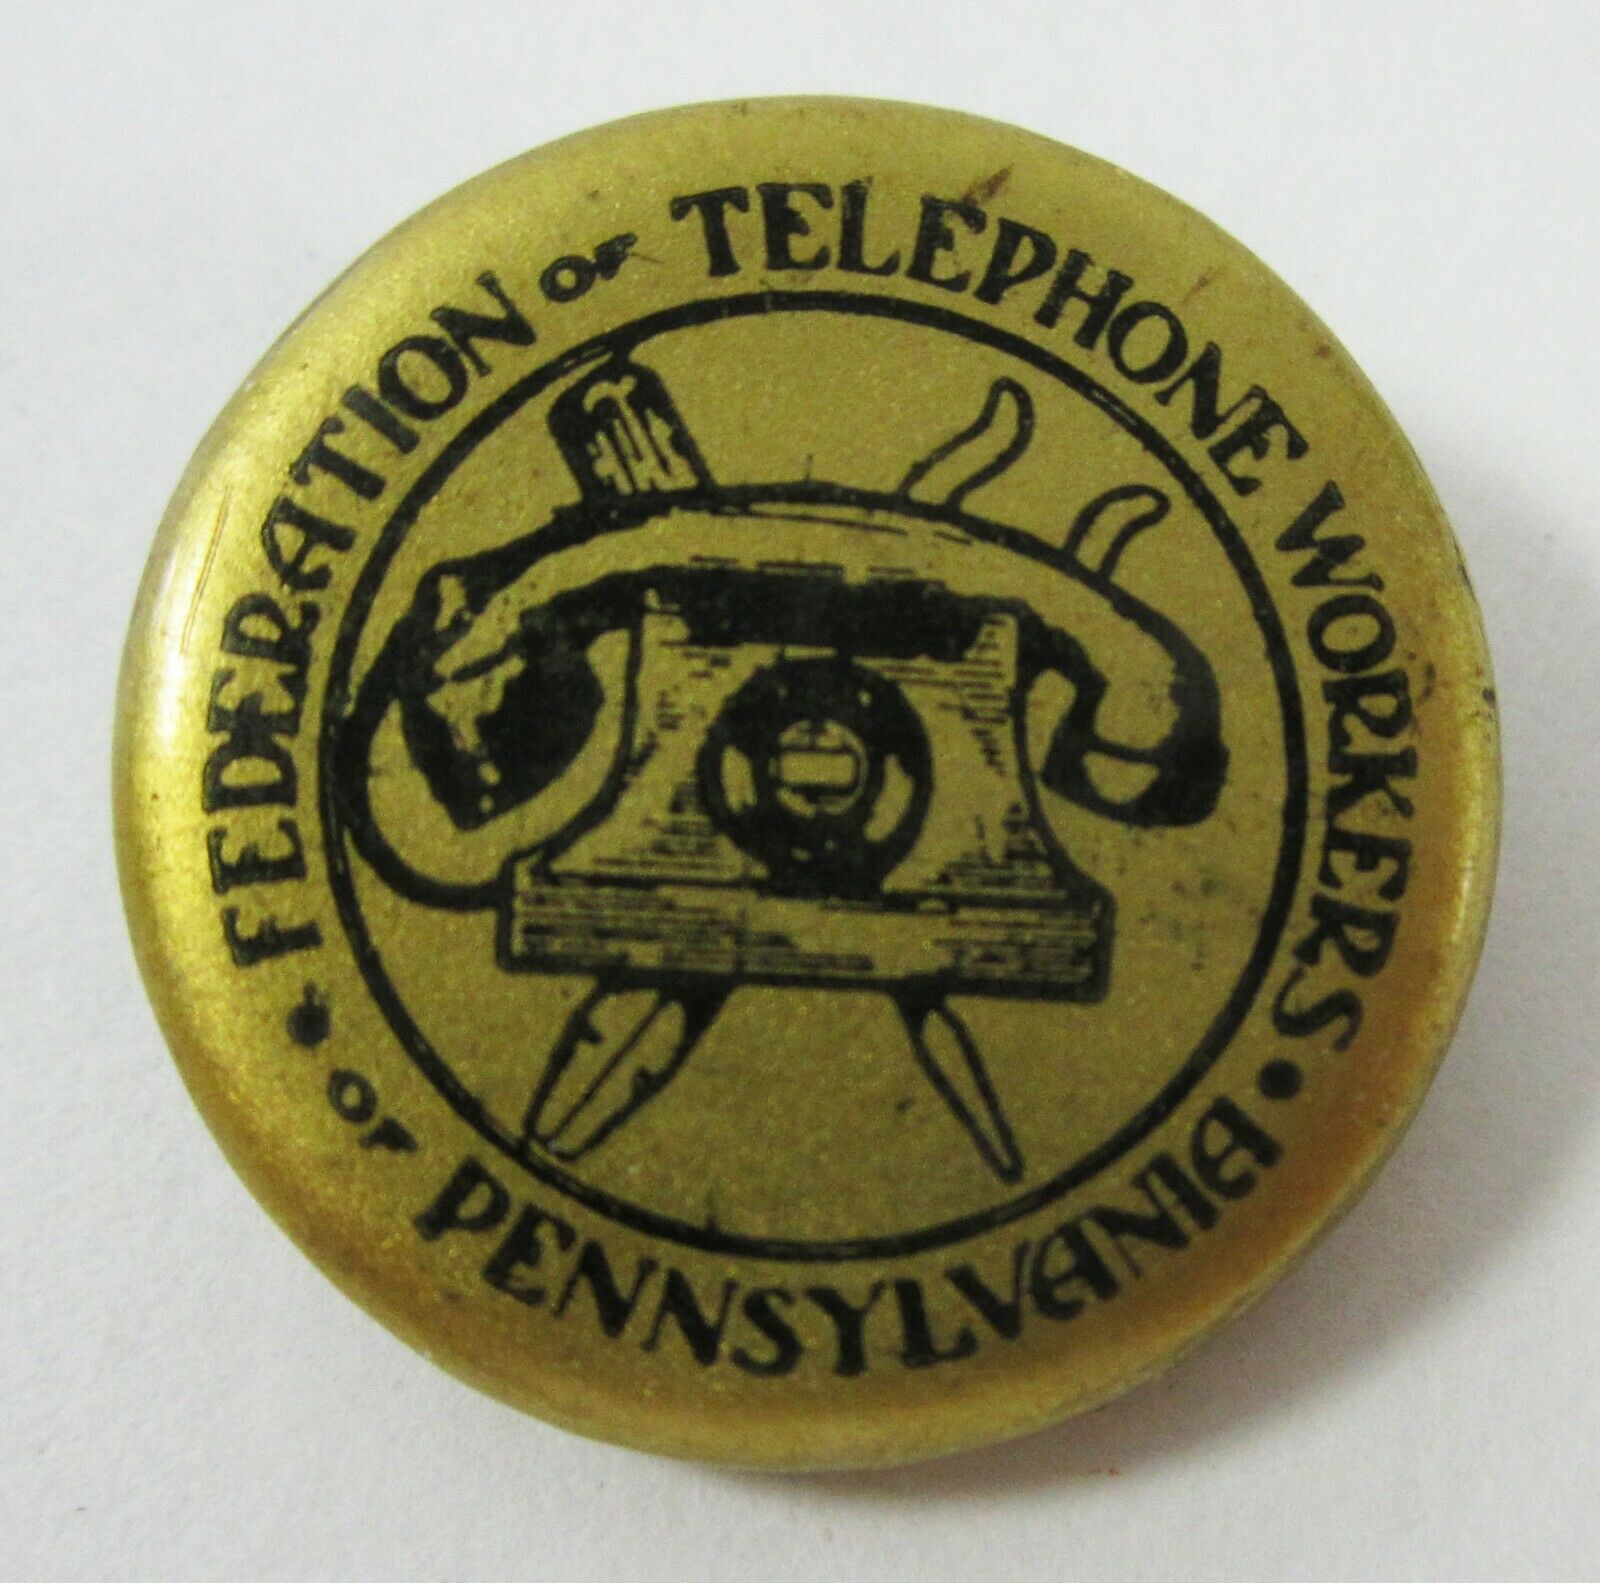 Vintage Federation Telephone Workers Pennsylvania Union Pinback Button 1930s